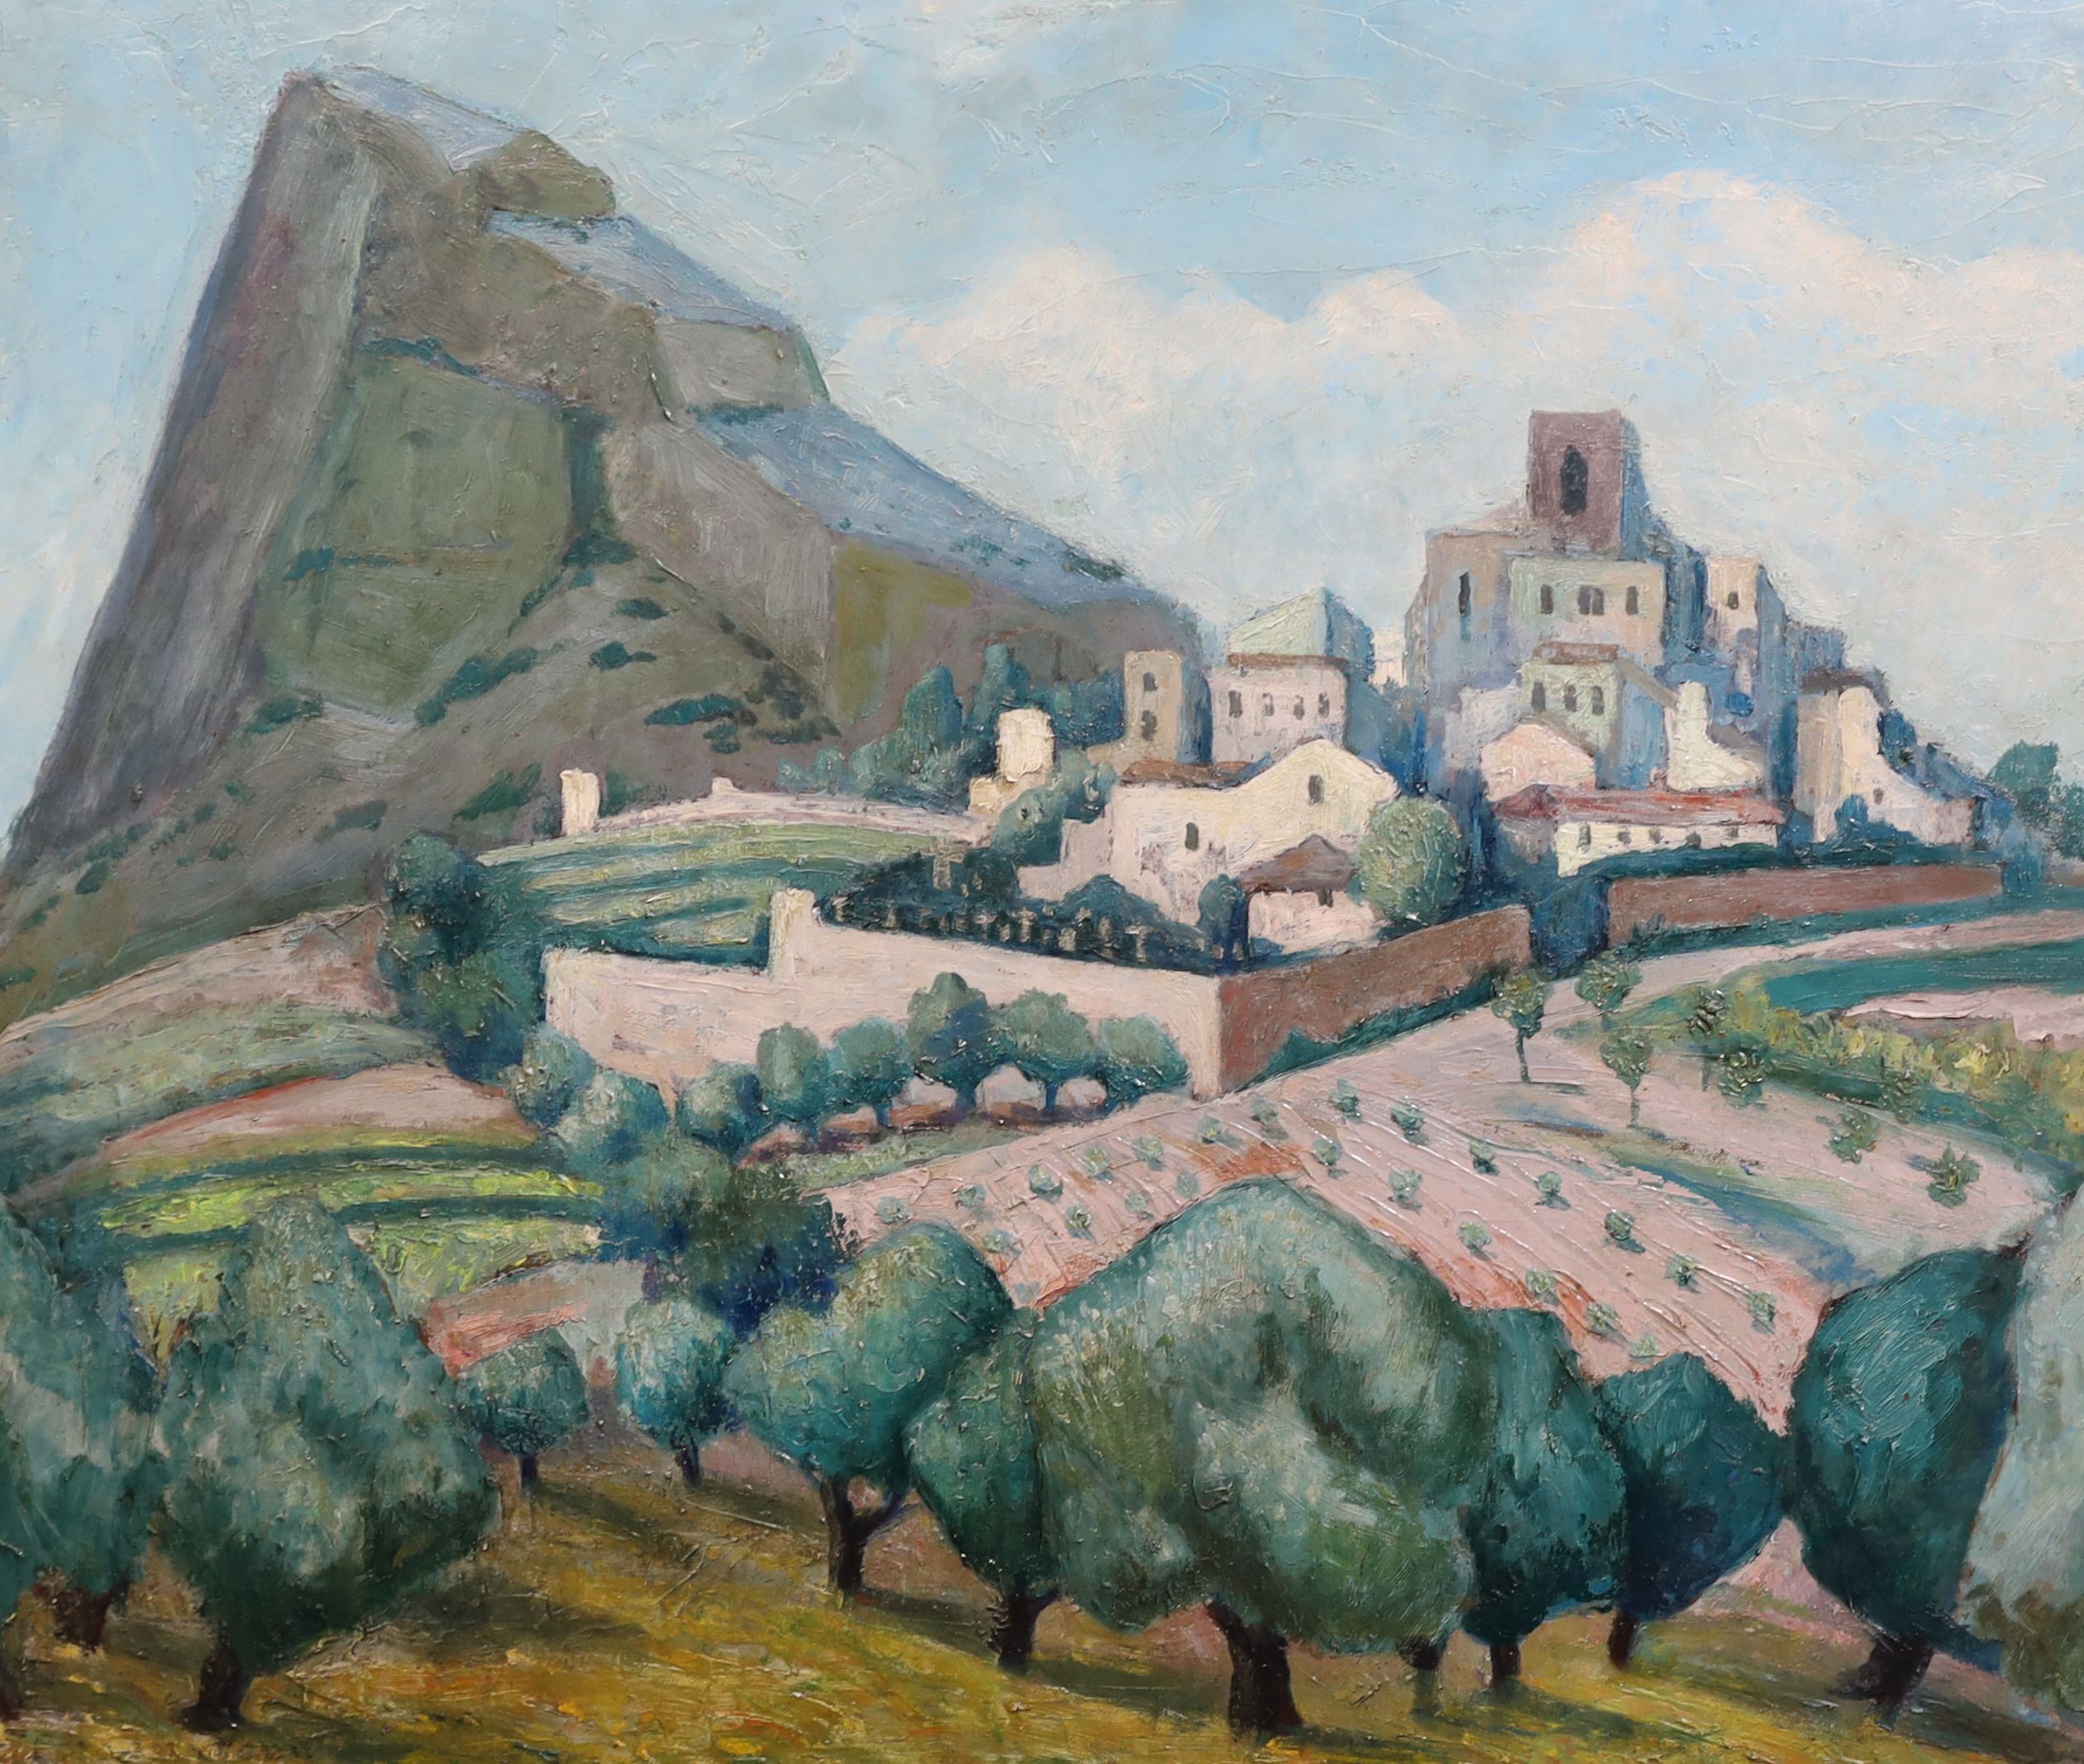 Attributed to Adrian Paul Allinson (1890-1959) Southern French landscape with hilltop townoil on